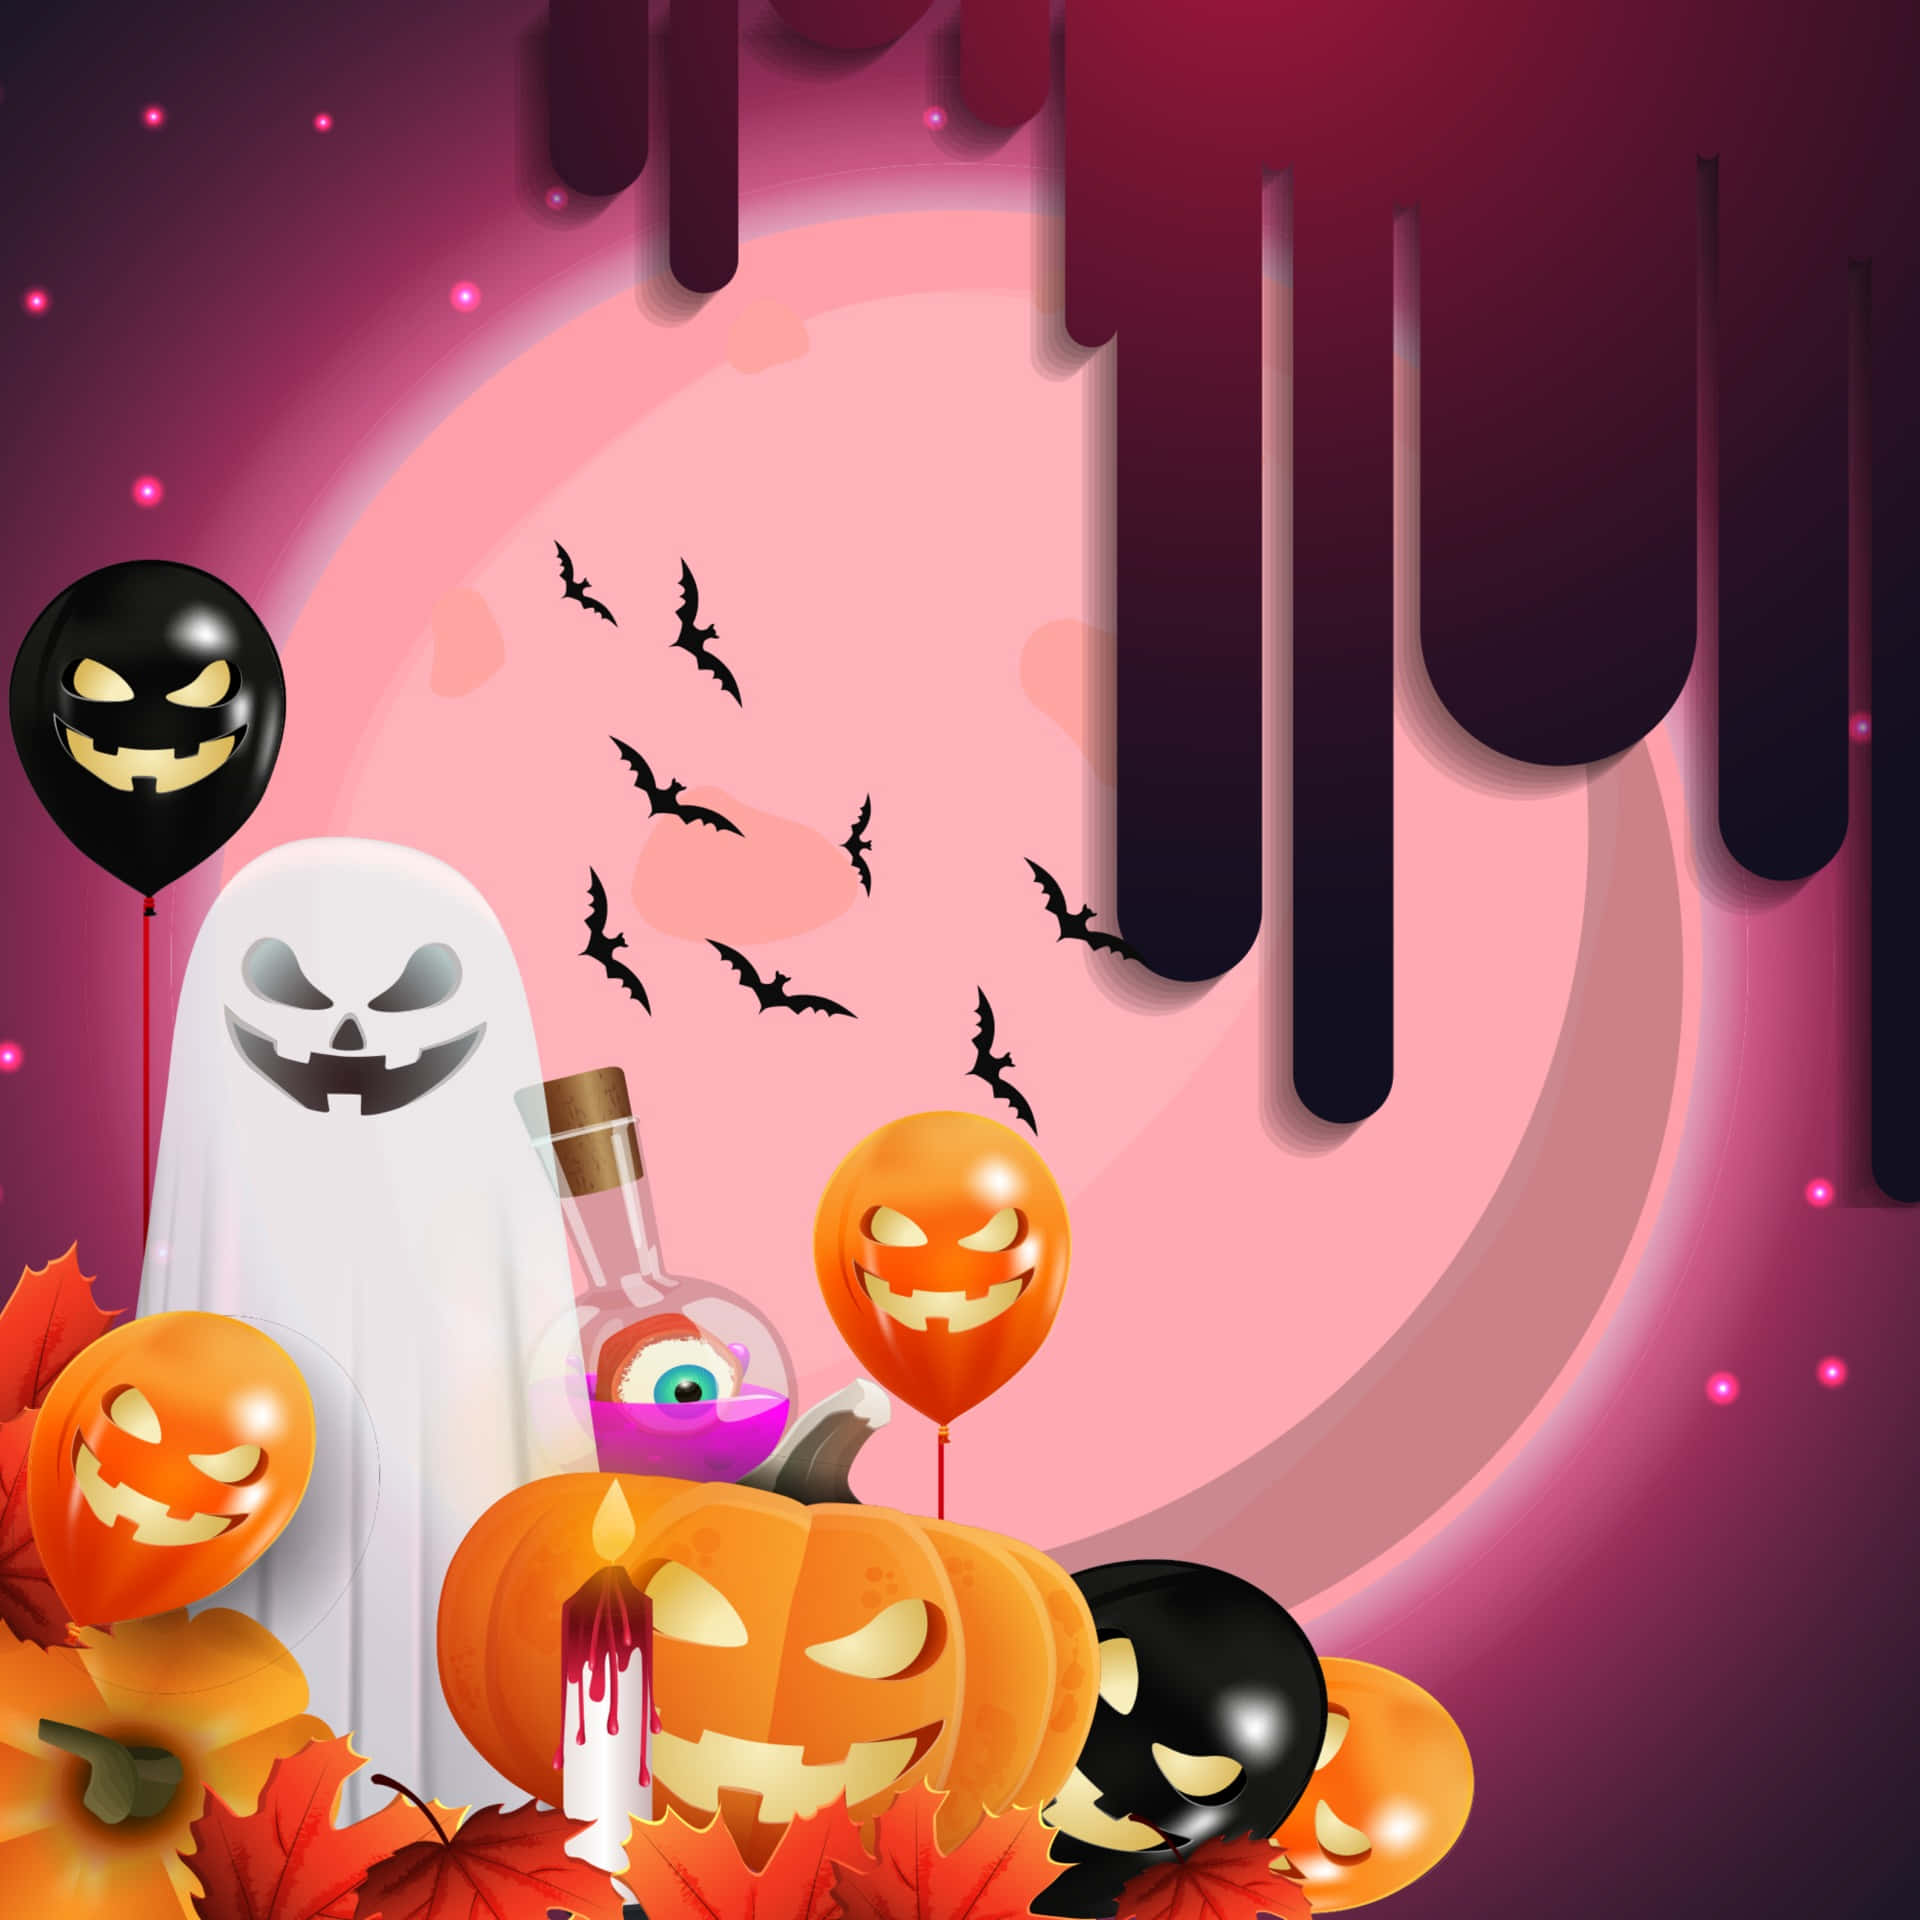 Halloween Background With Ghosts, Pumpkins And Balloons